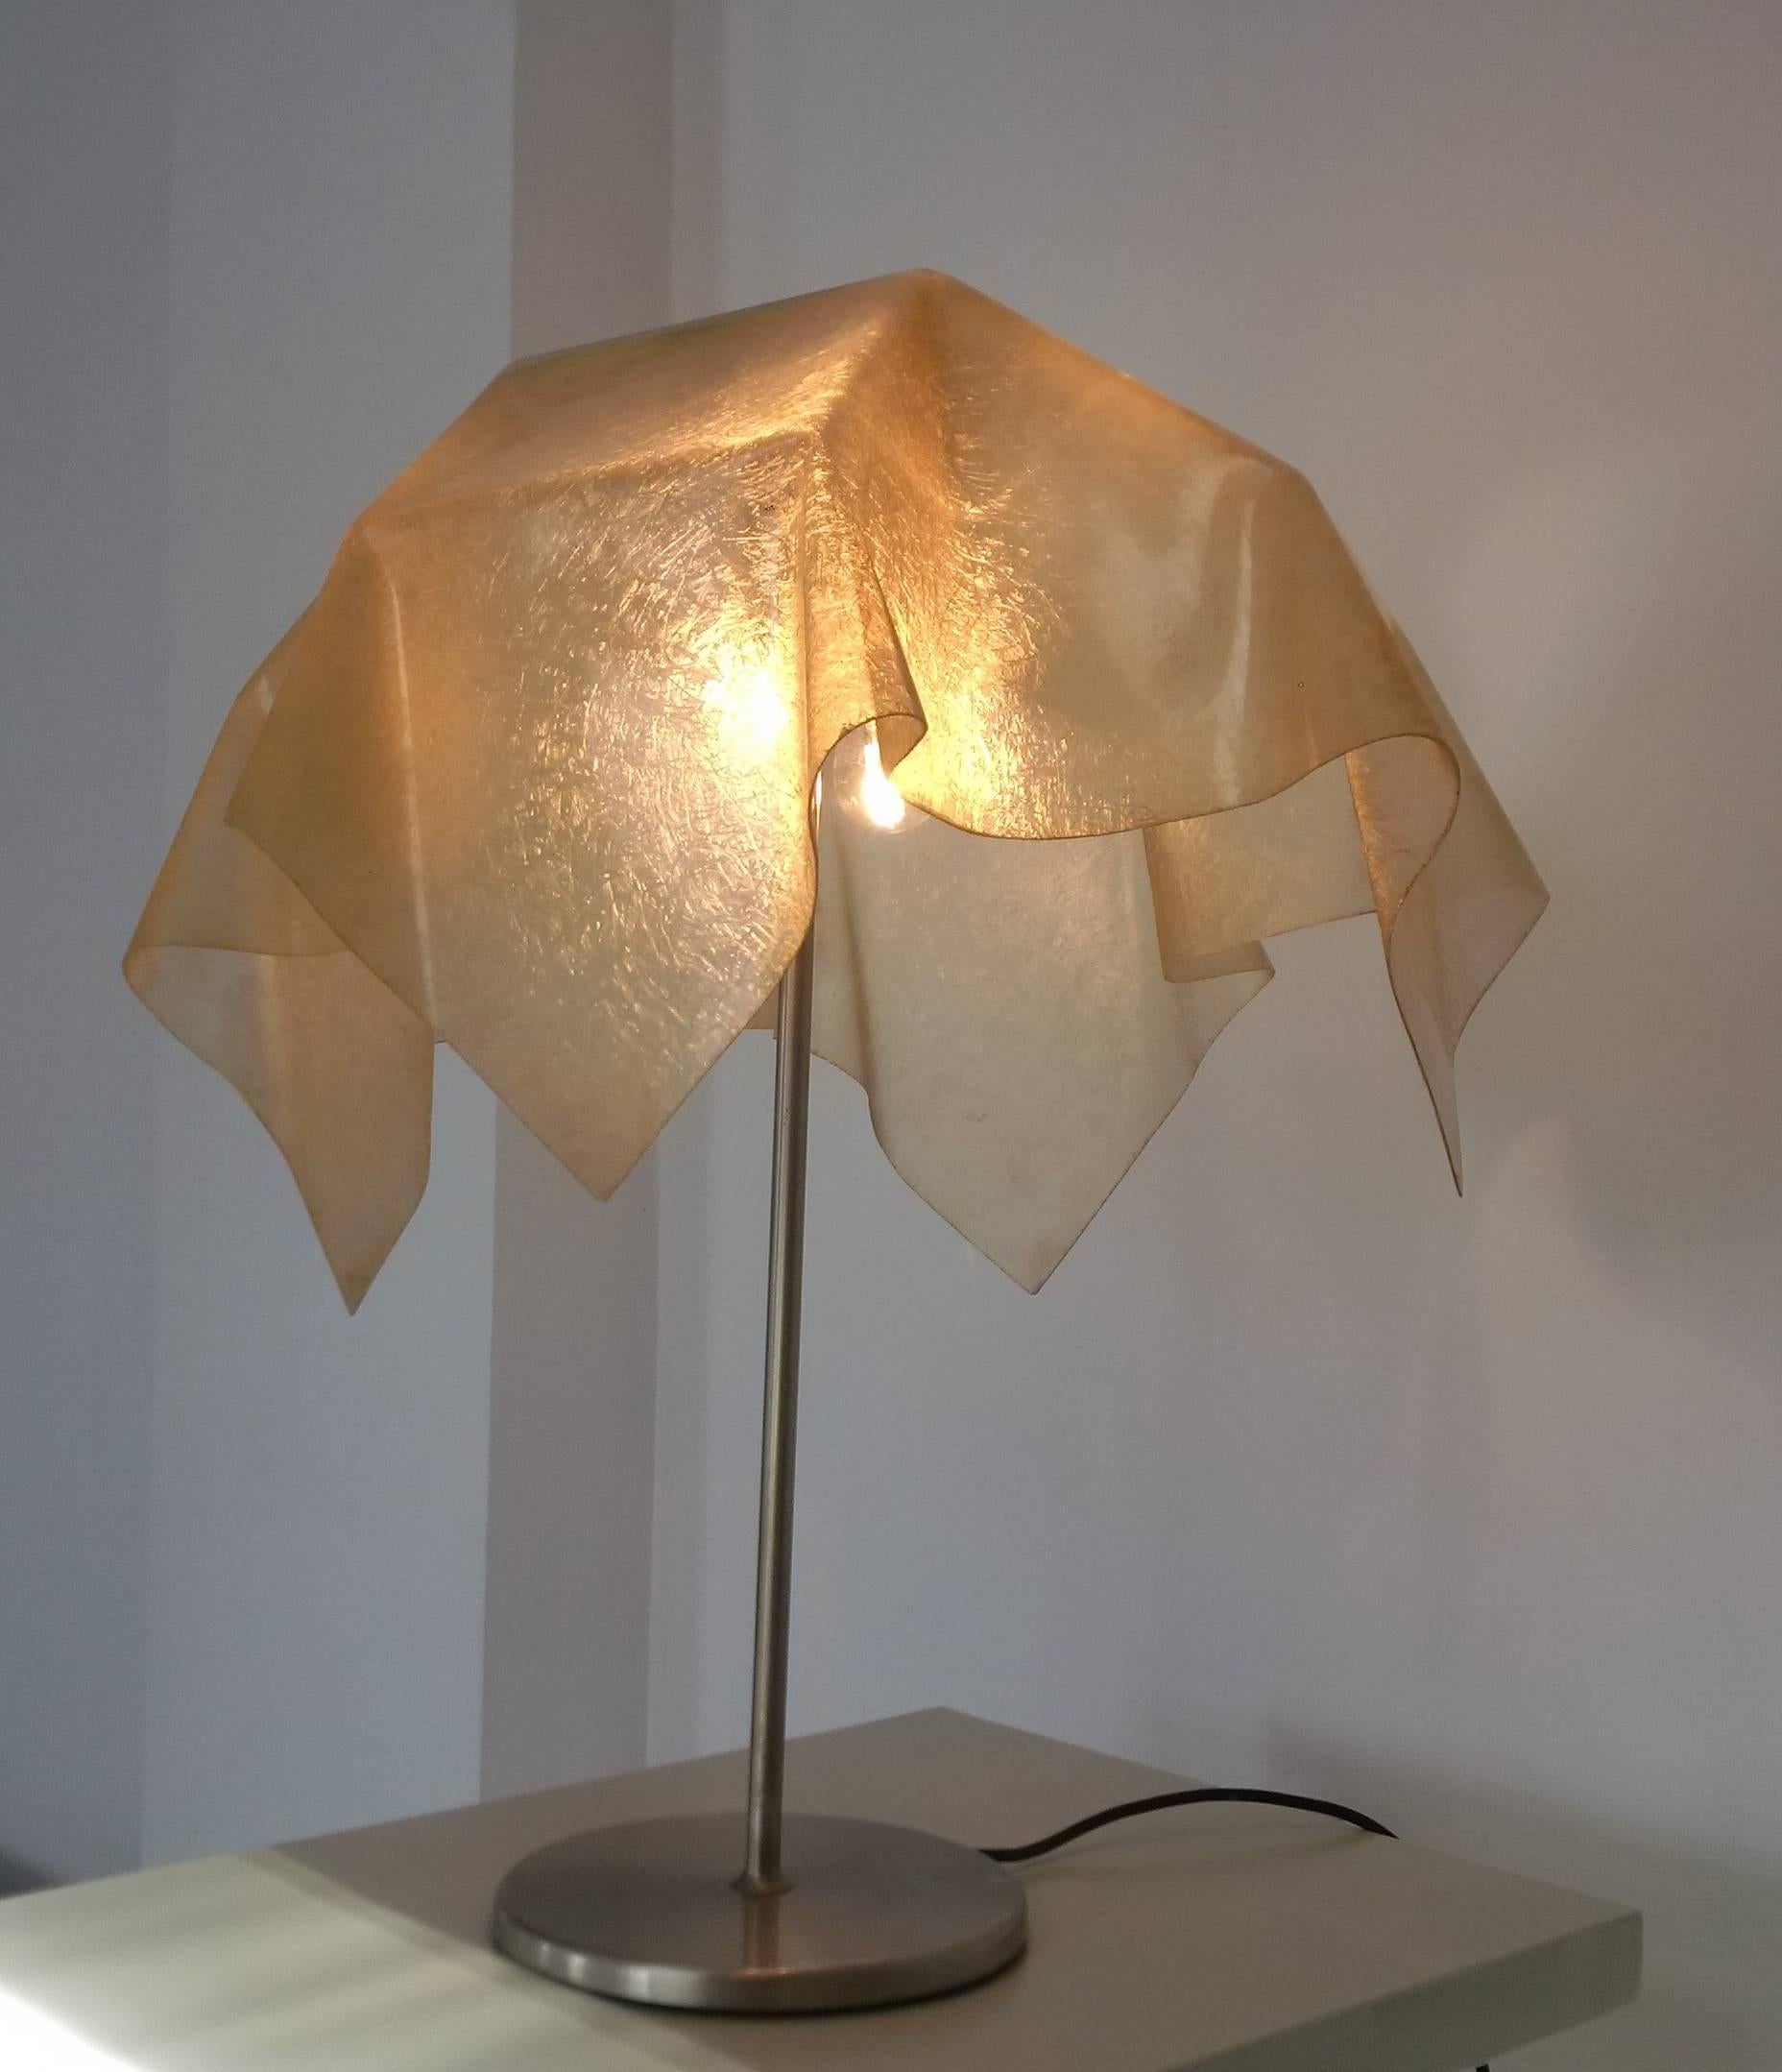 A rare table lamp by Valenti. A fiberglass cloth or tissue is draped over the foot of this lamp with dramatic effect. Different from every angle.